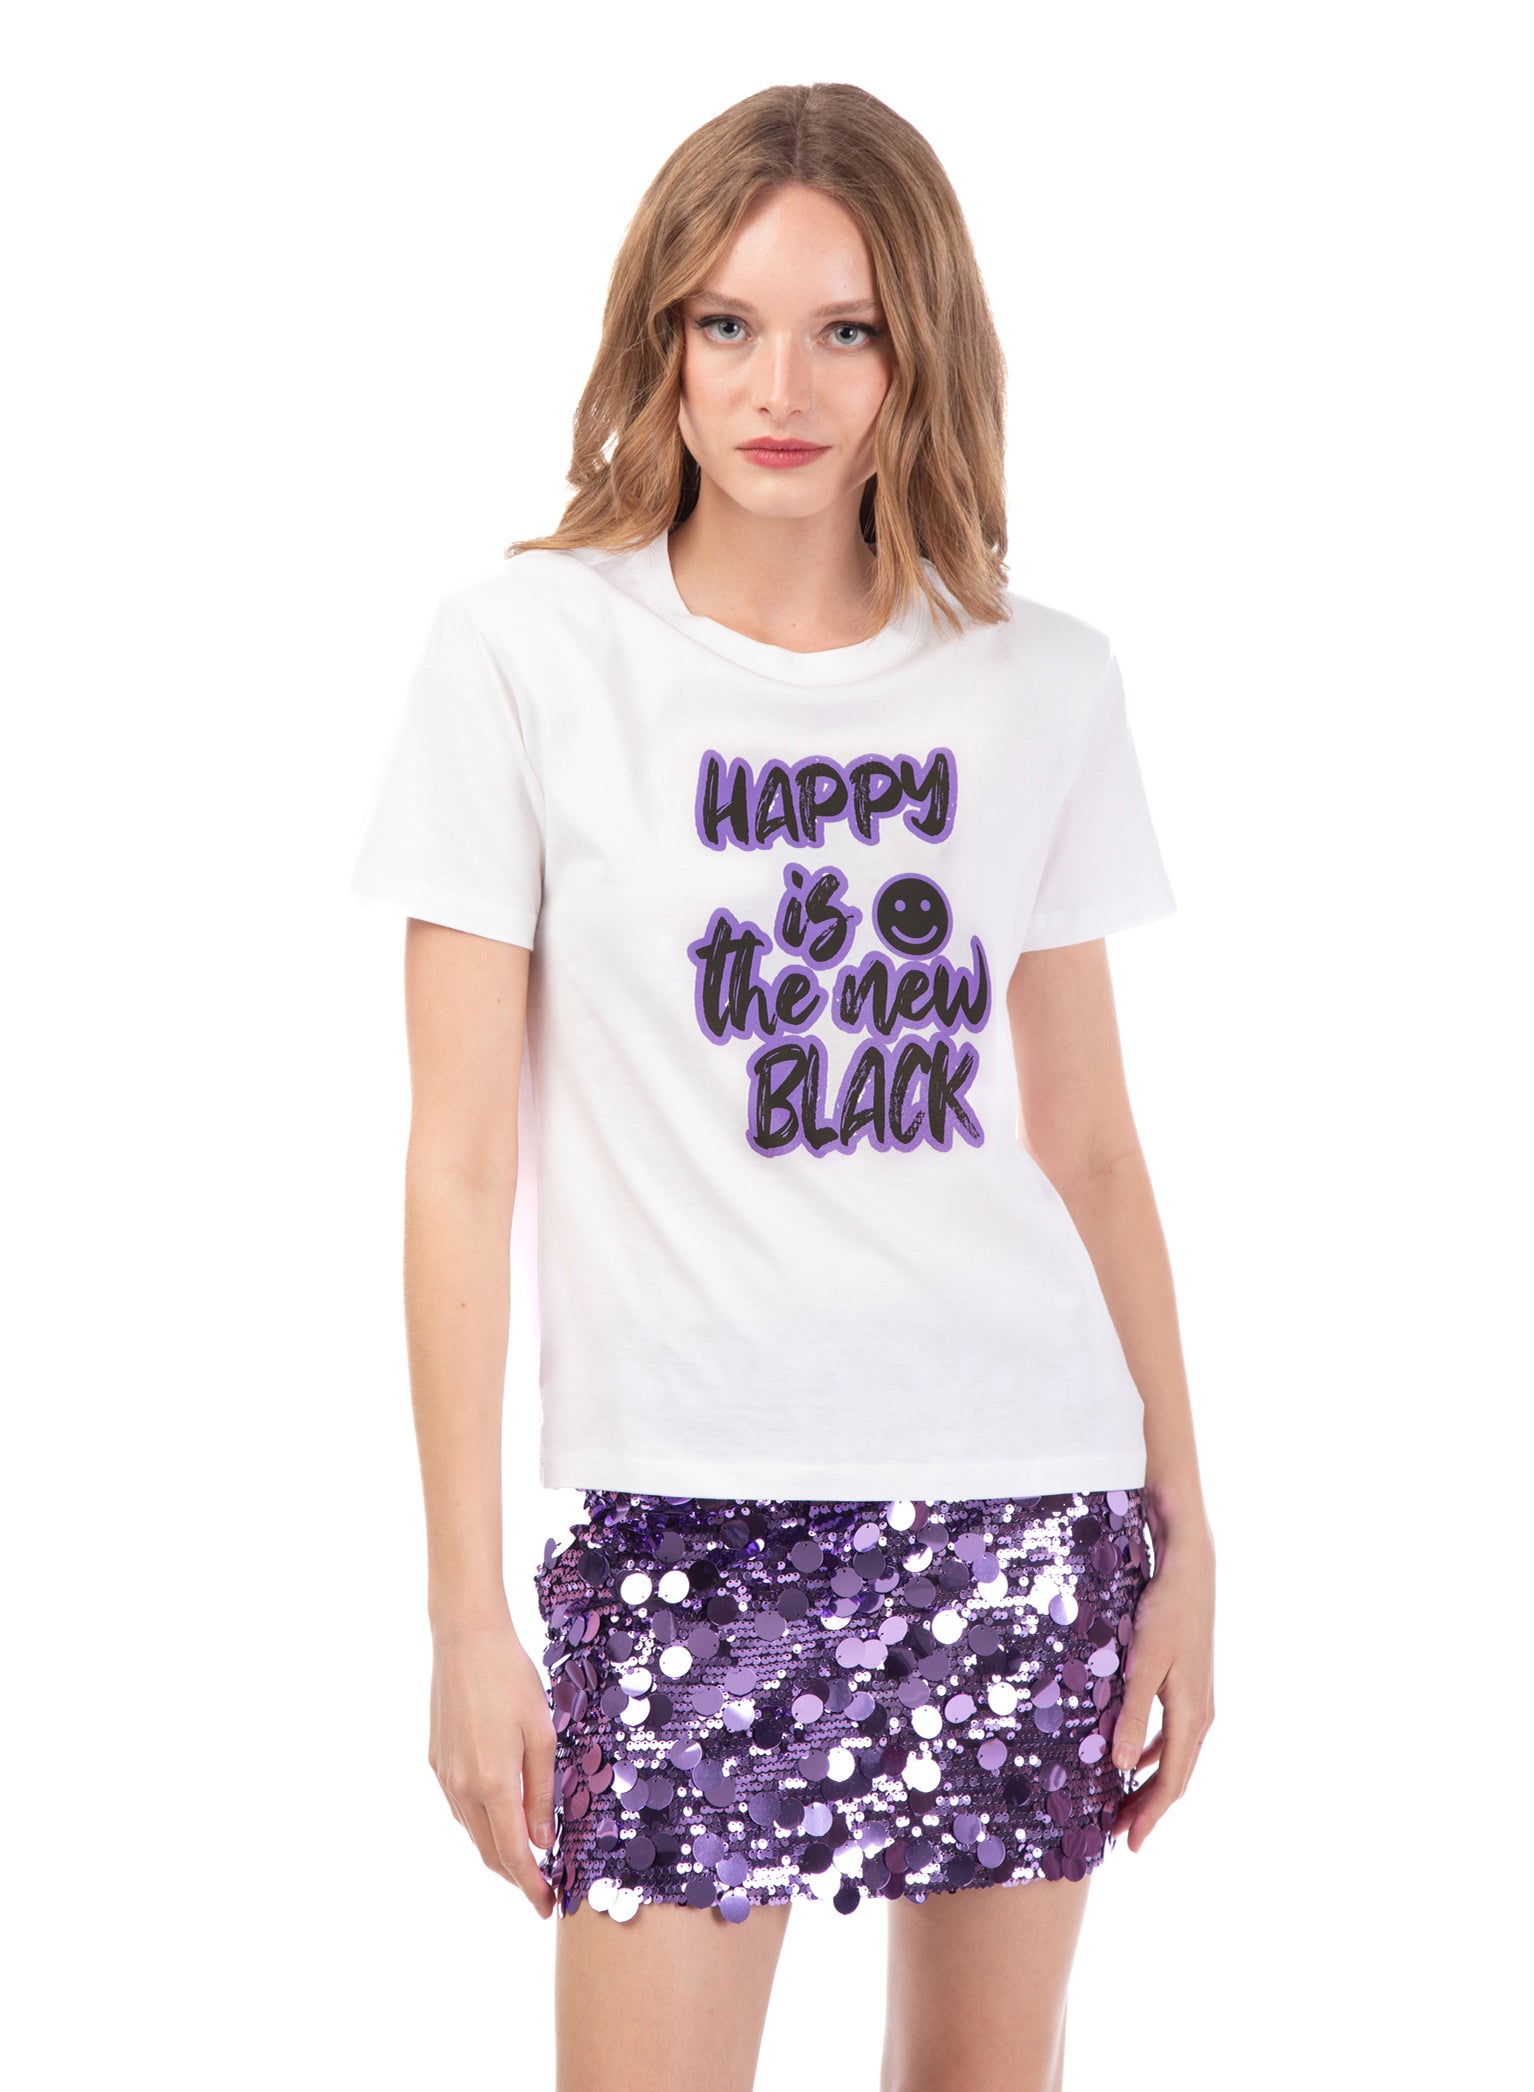 T-shirt bianca 'Happy is the new black'